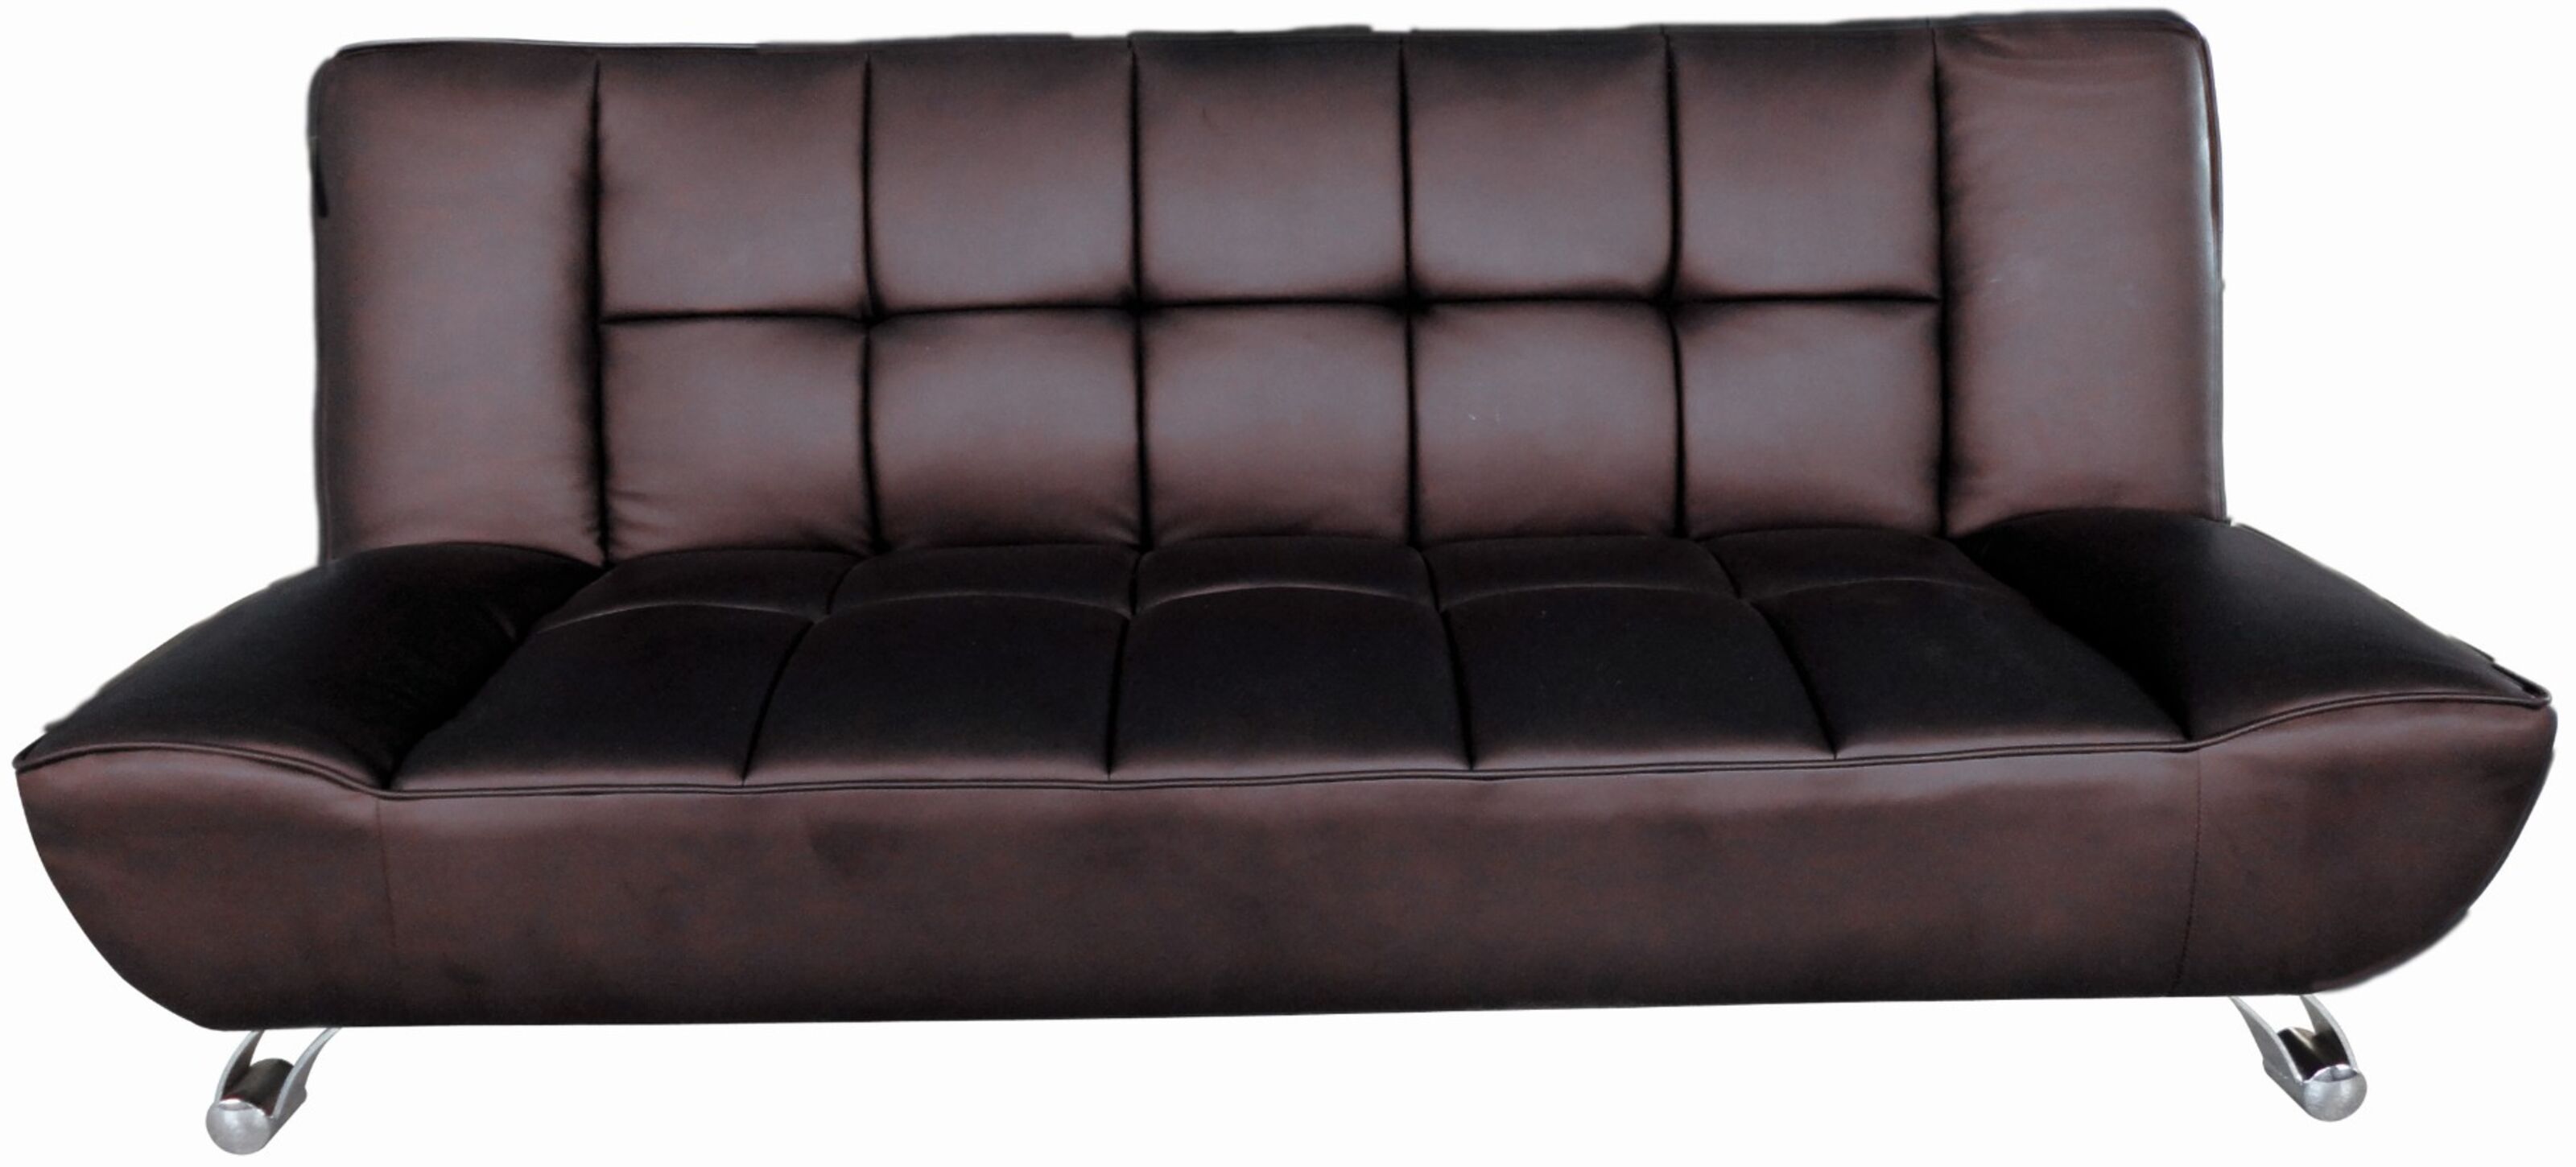 Agata Brown Faux Leather Sofa Bed With, Imitation Leather Sofa Bed